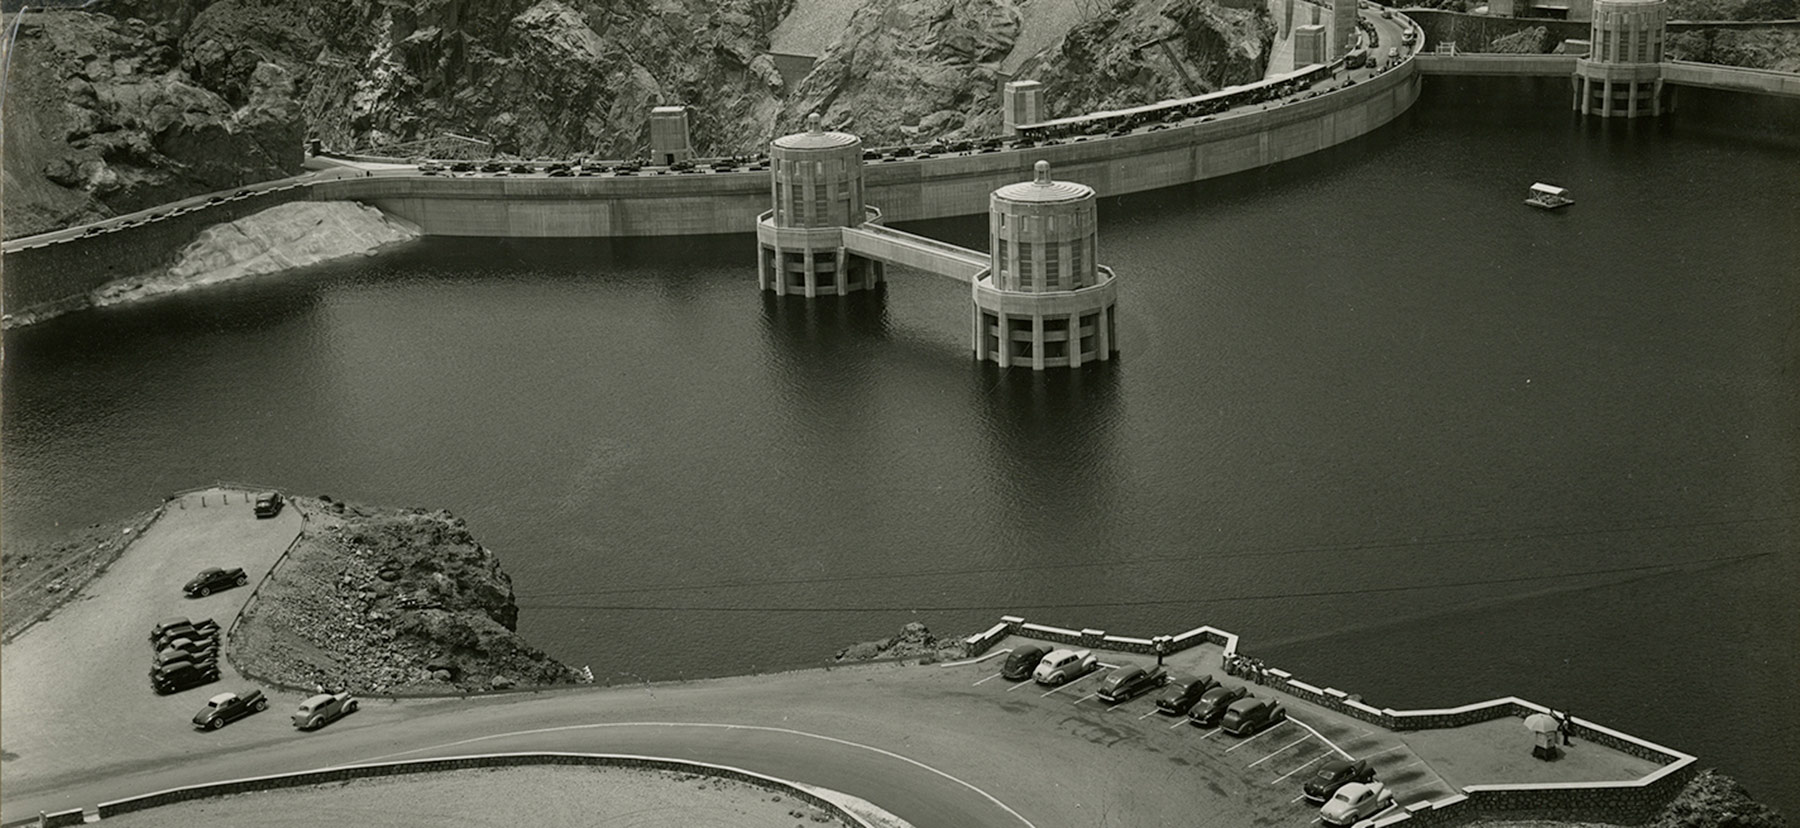 Boulder Dam as photographed by Edward Weston